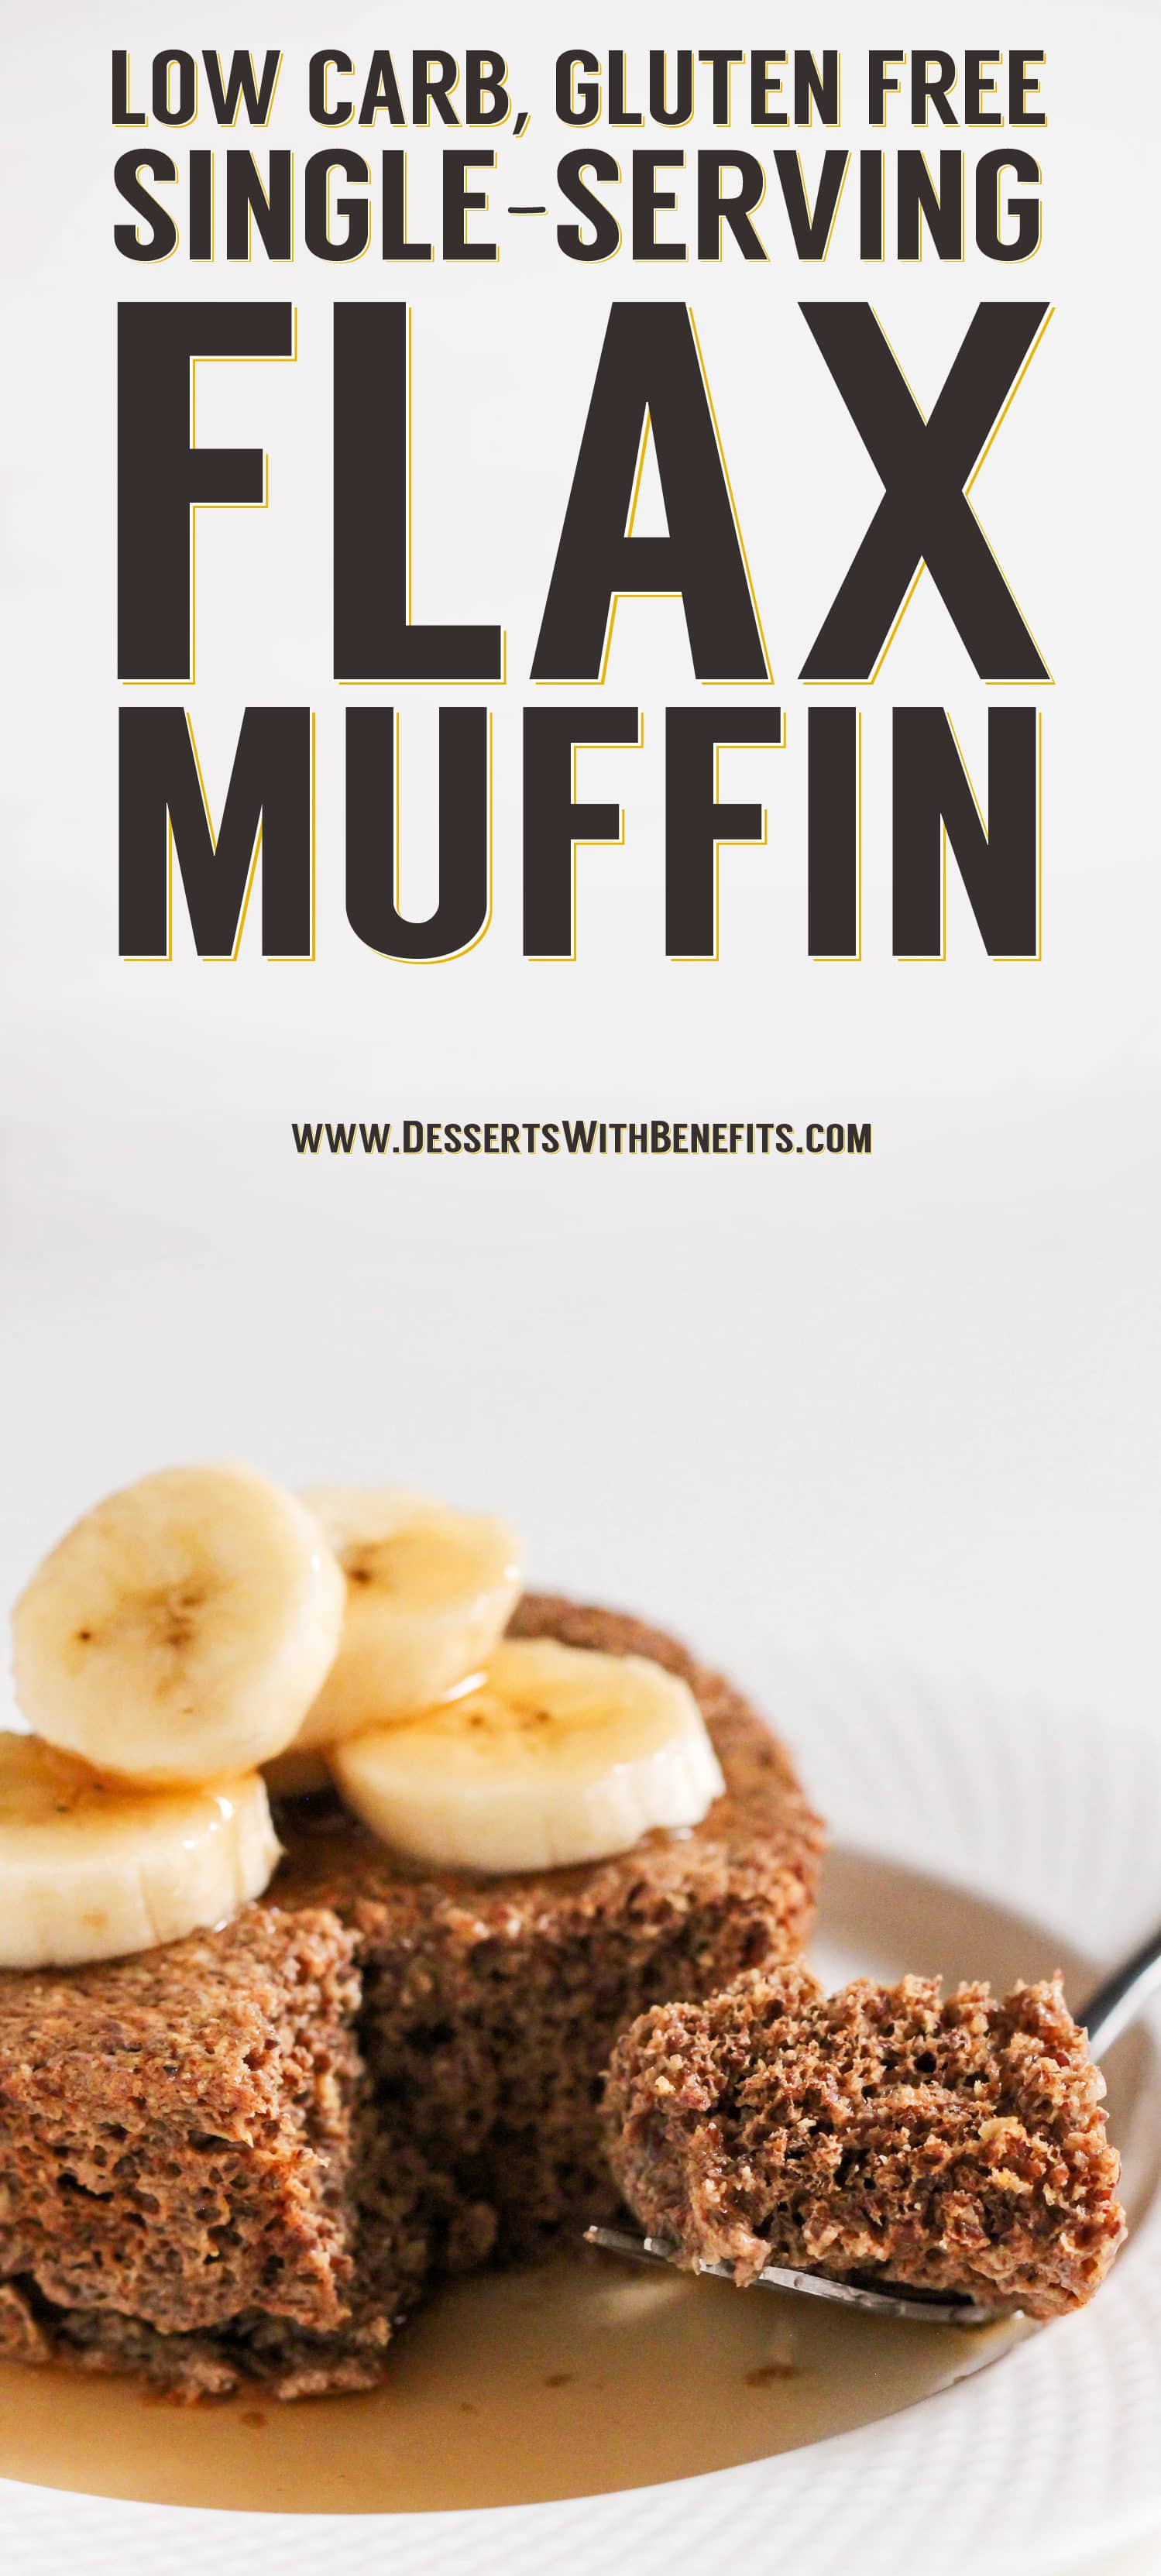 You can make this Healthy Single-Serving Flaxseed Microwave Muffin in just 5 minutes flat! This soft, springy, sweet, and hearty muffins makes the perfect balanced breakfast, snack, and dessert. It's hard to believe it's sugar free, low carb, high protein, high fiber, AND gluten free too! Plus, it's full of nutritious omega-3 fatty acids, vitamins and minerals. Healthy dessert recipes at the Desserts With Benefits Blog (www.DessertsWithBenefits.com)